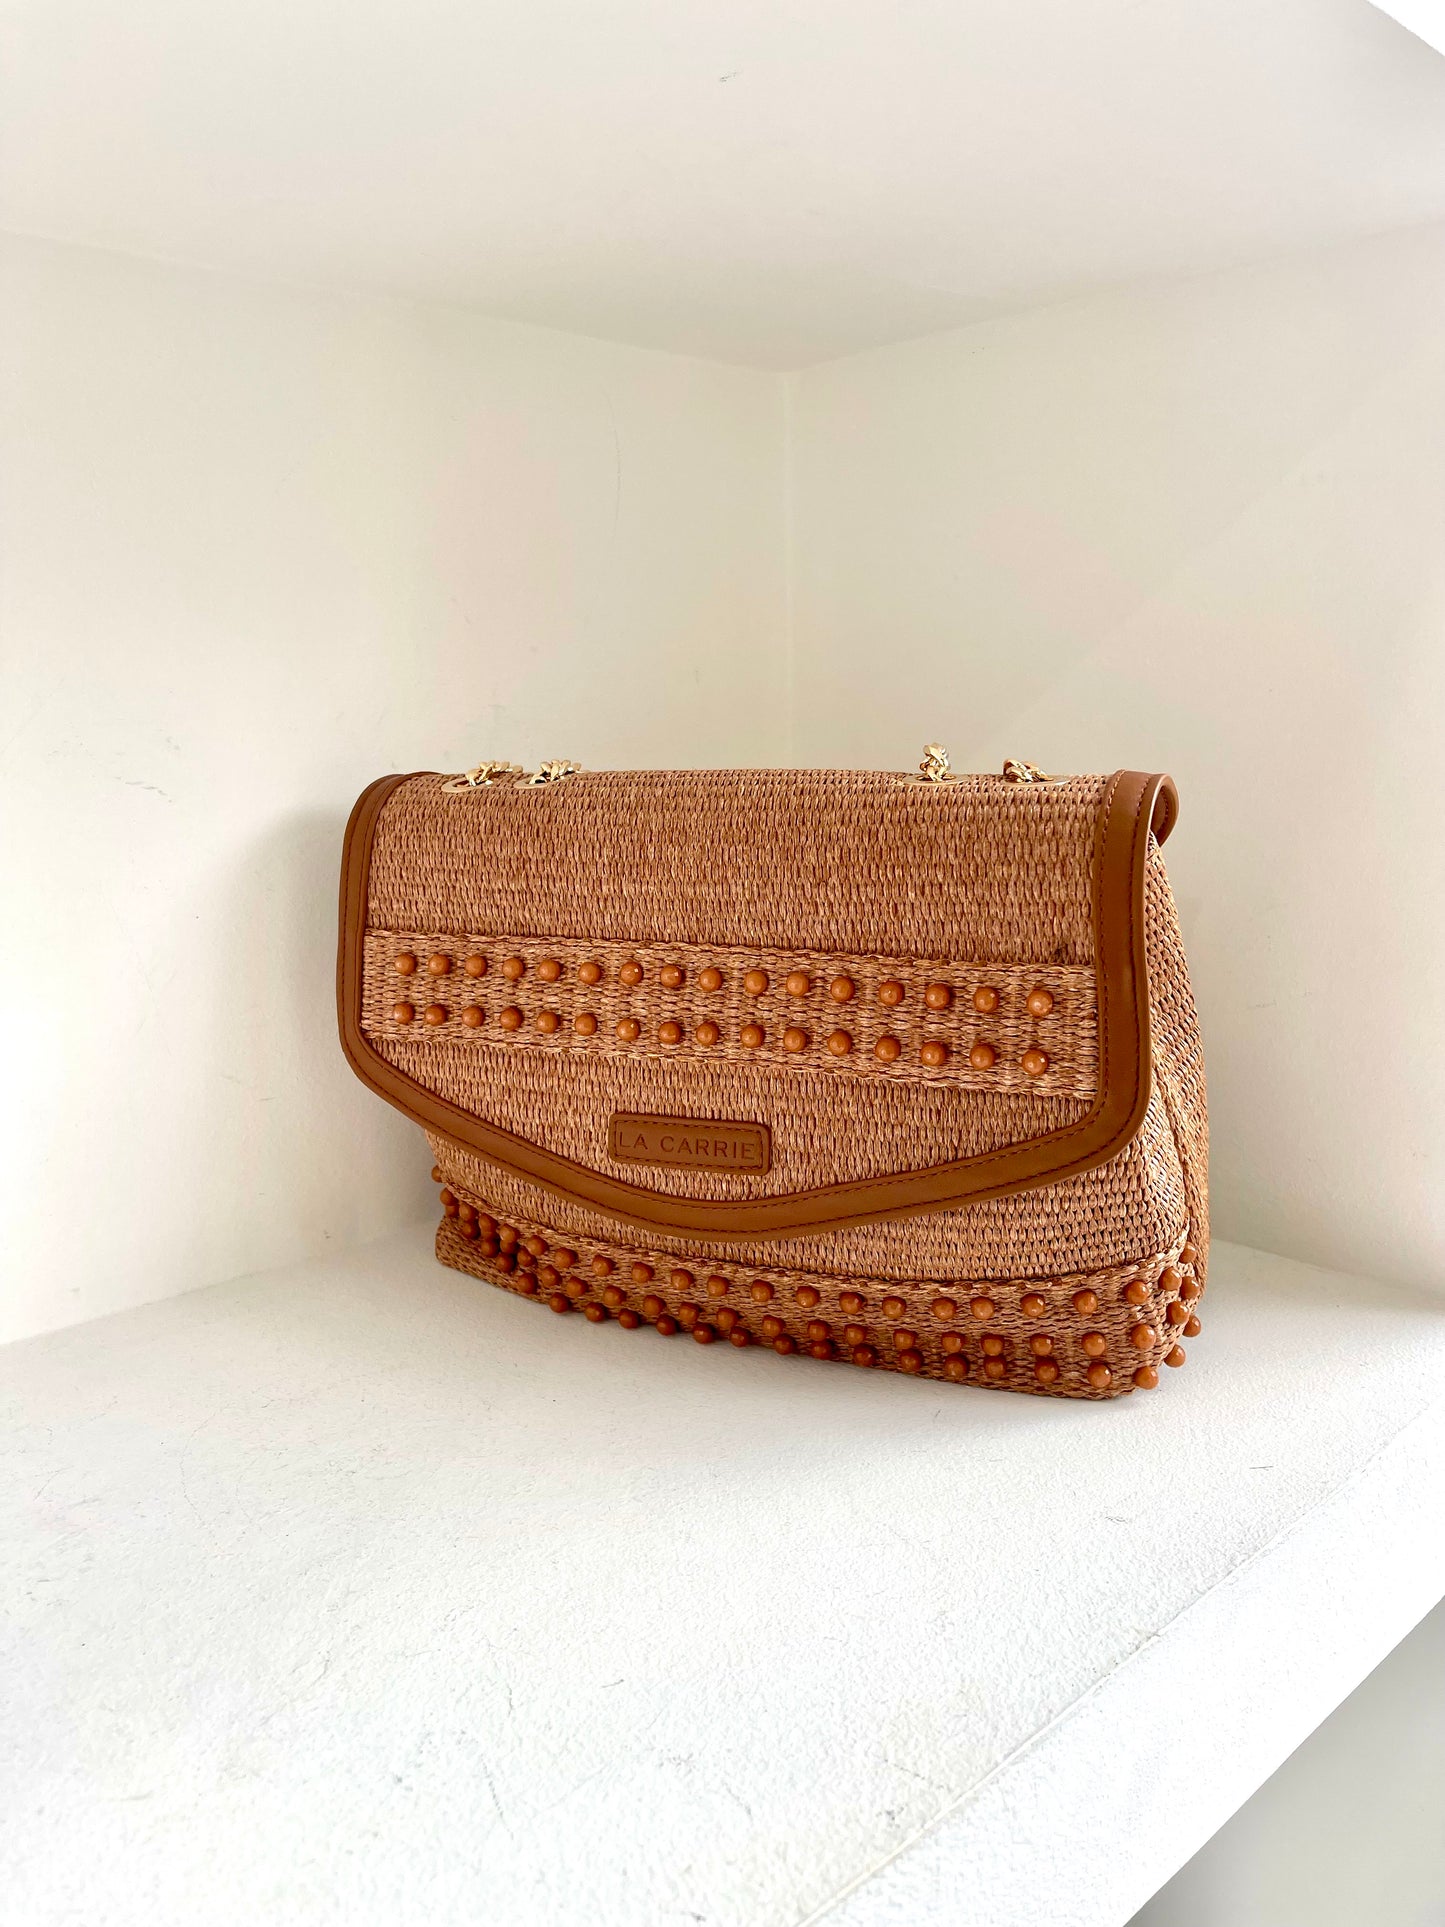 Brown handbag with a double strap